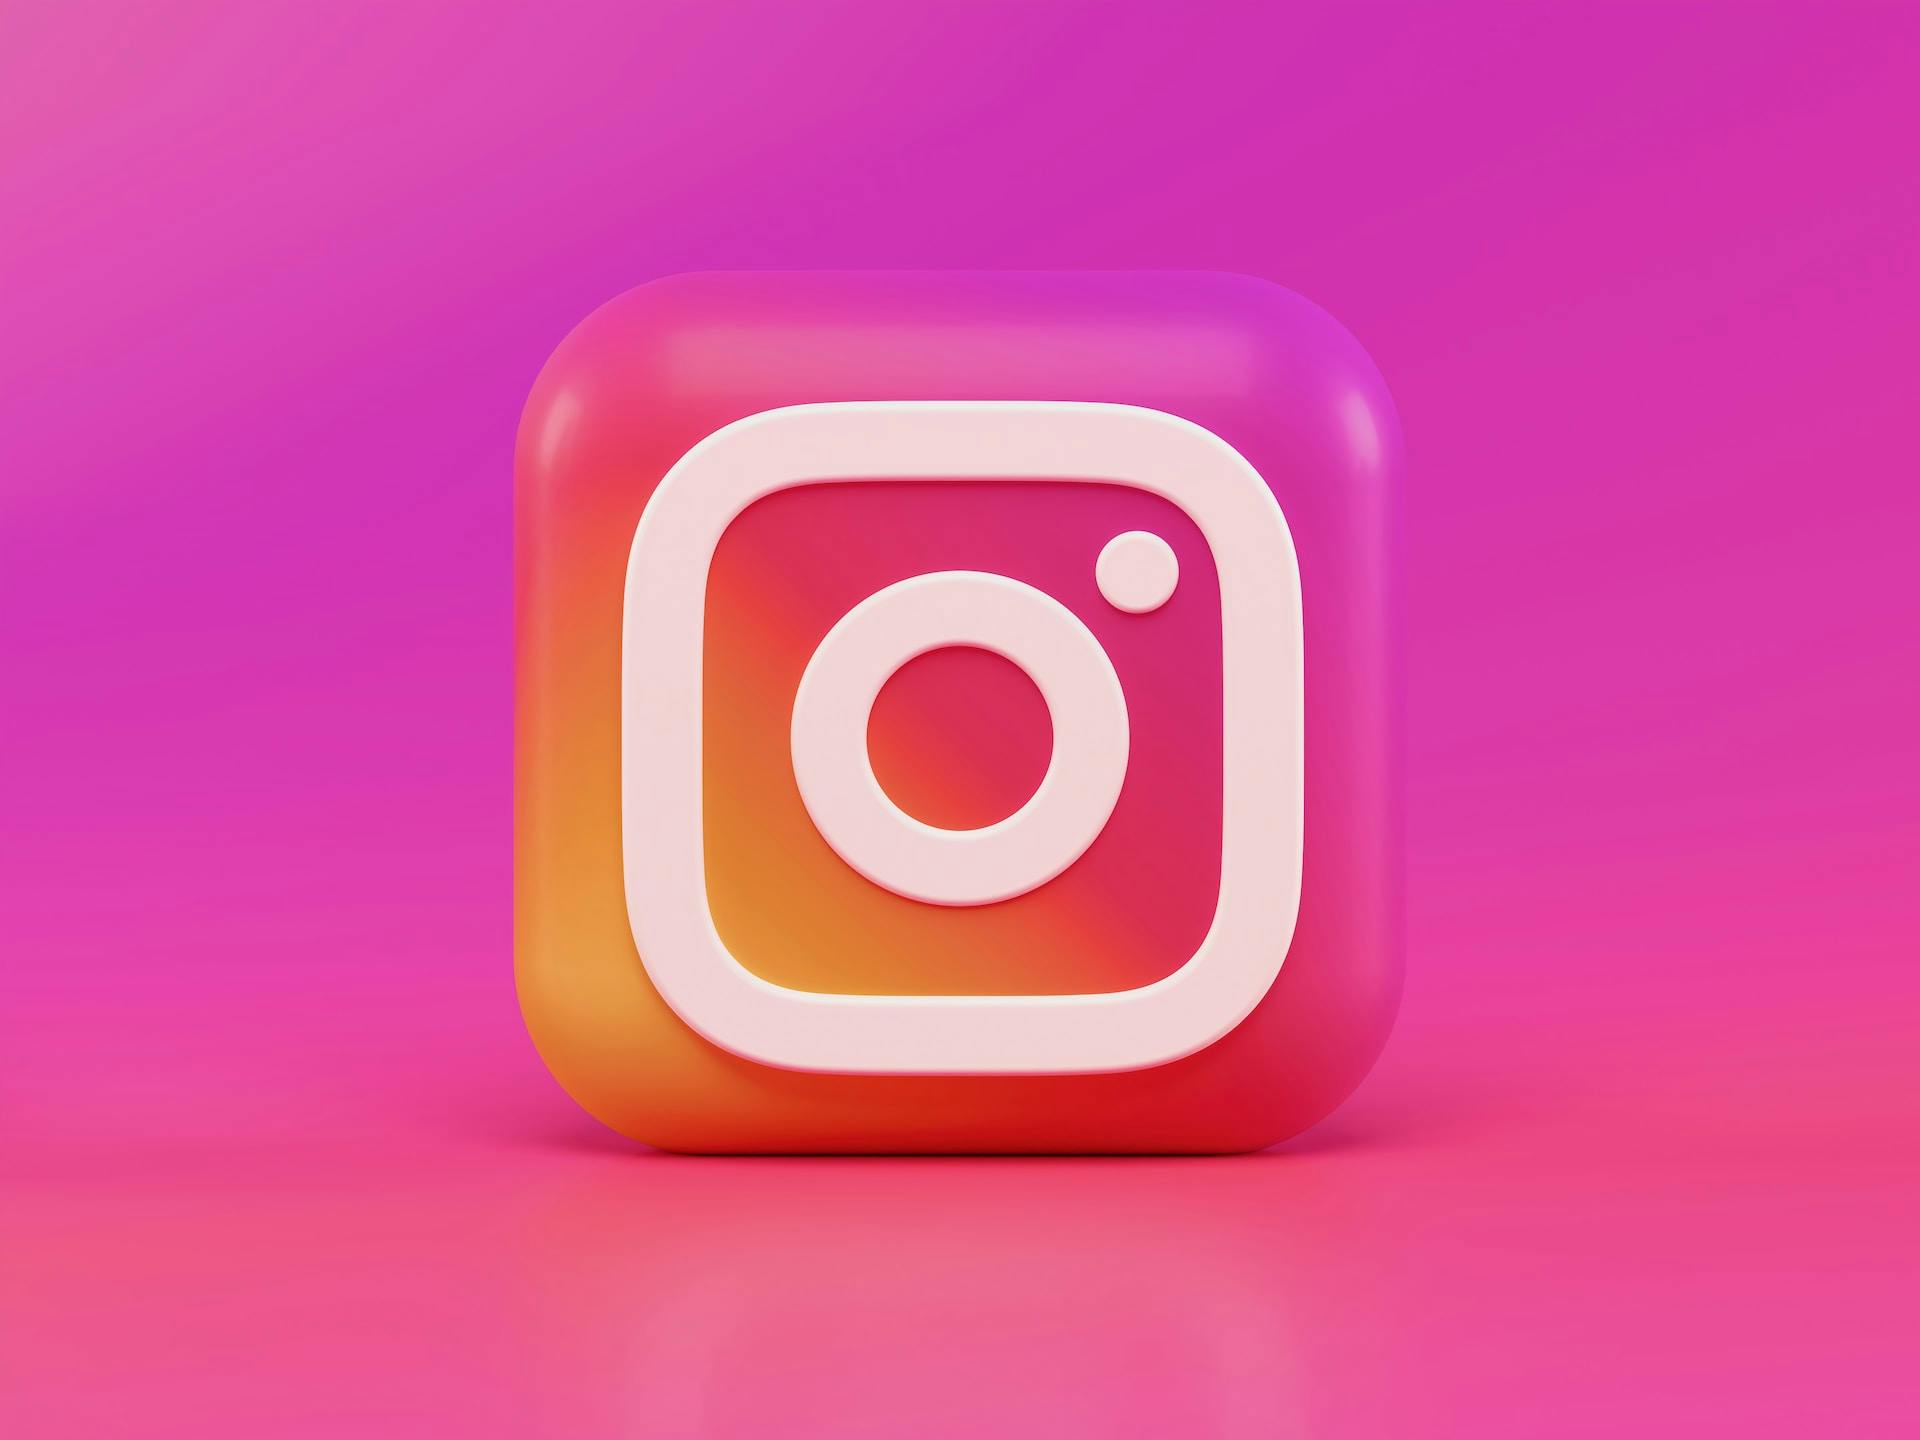 A vibrant image with the Instagram logo in the center